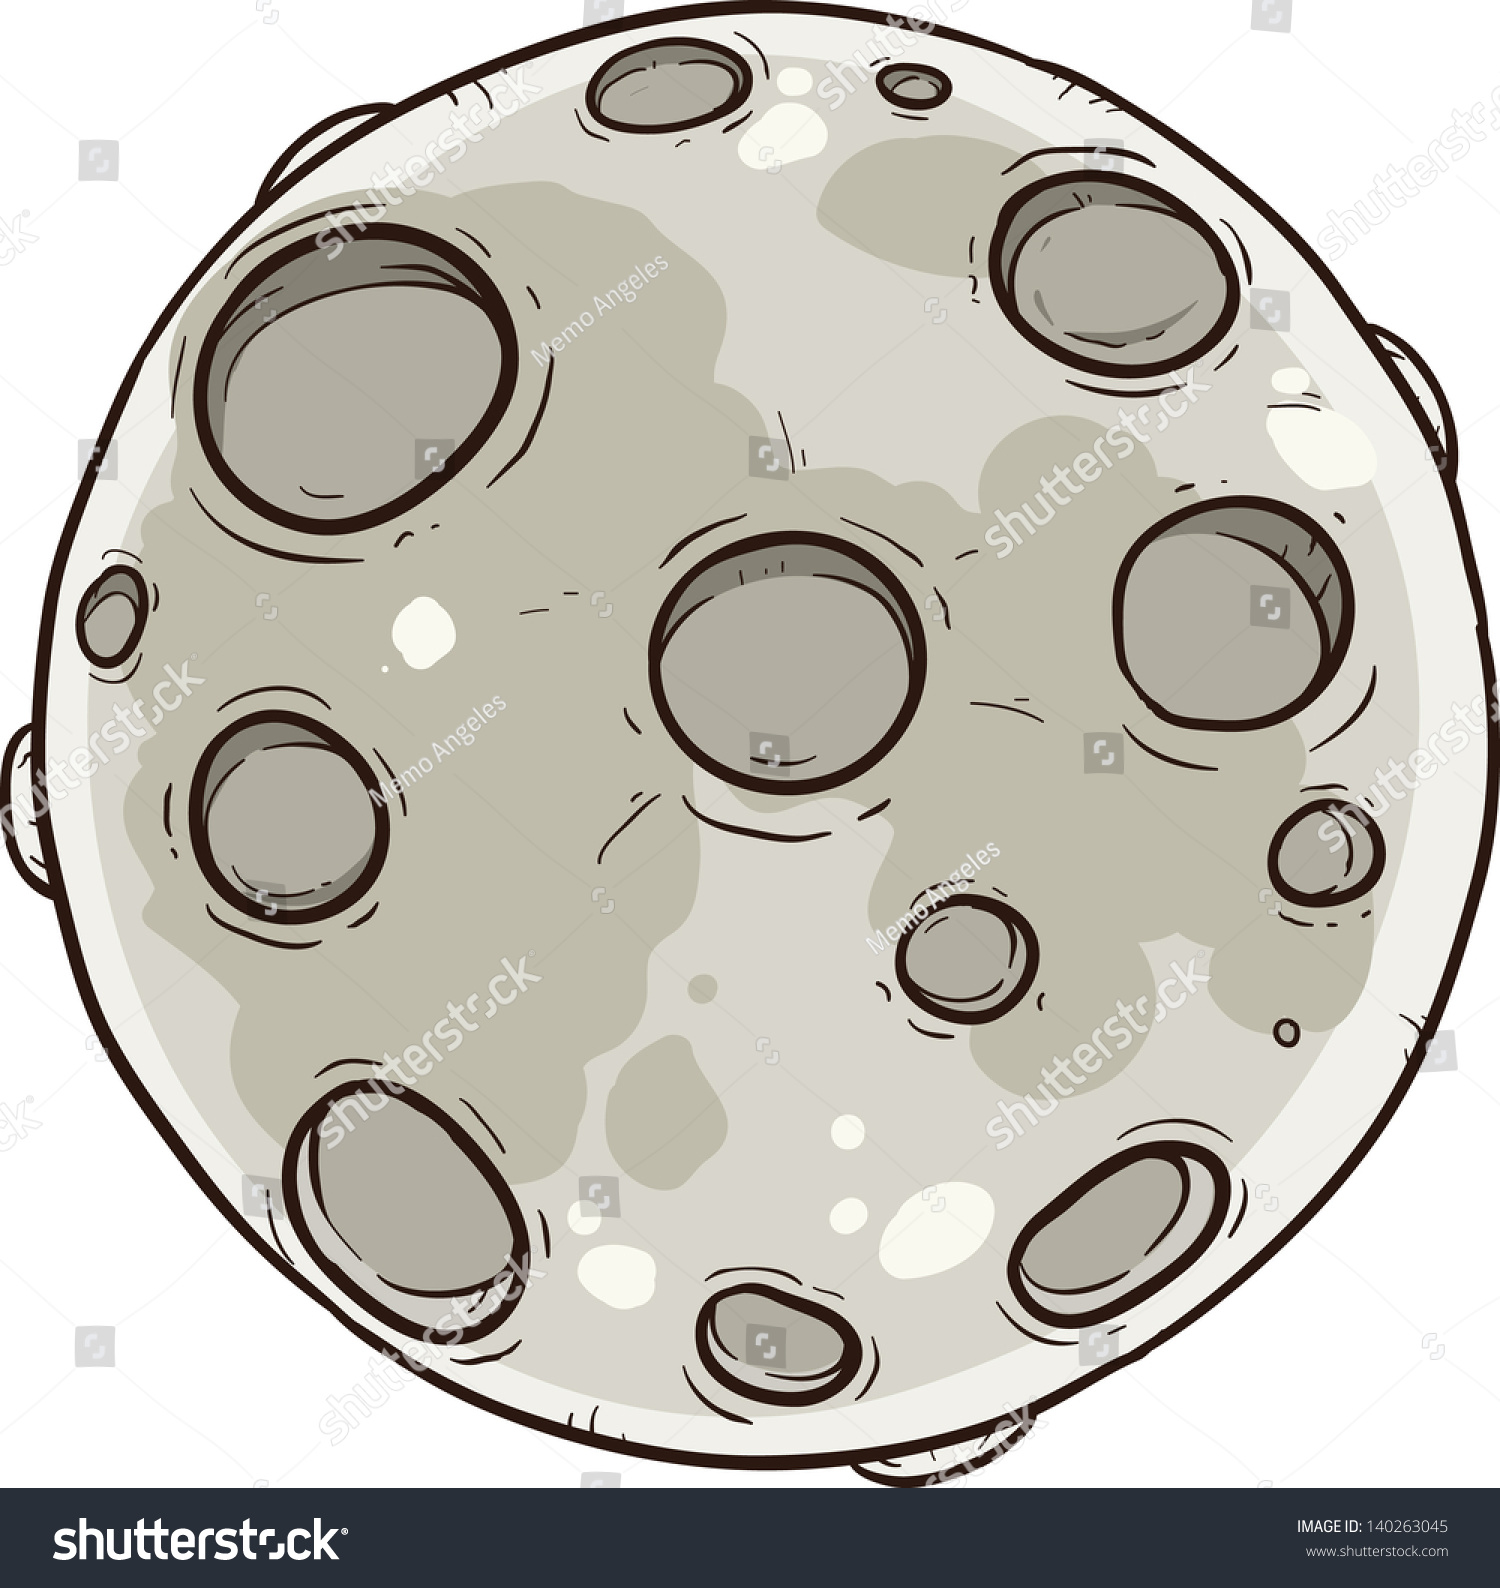 moon crater clipart - photo #5